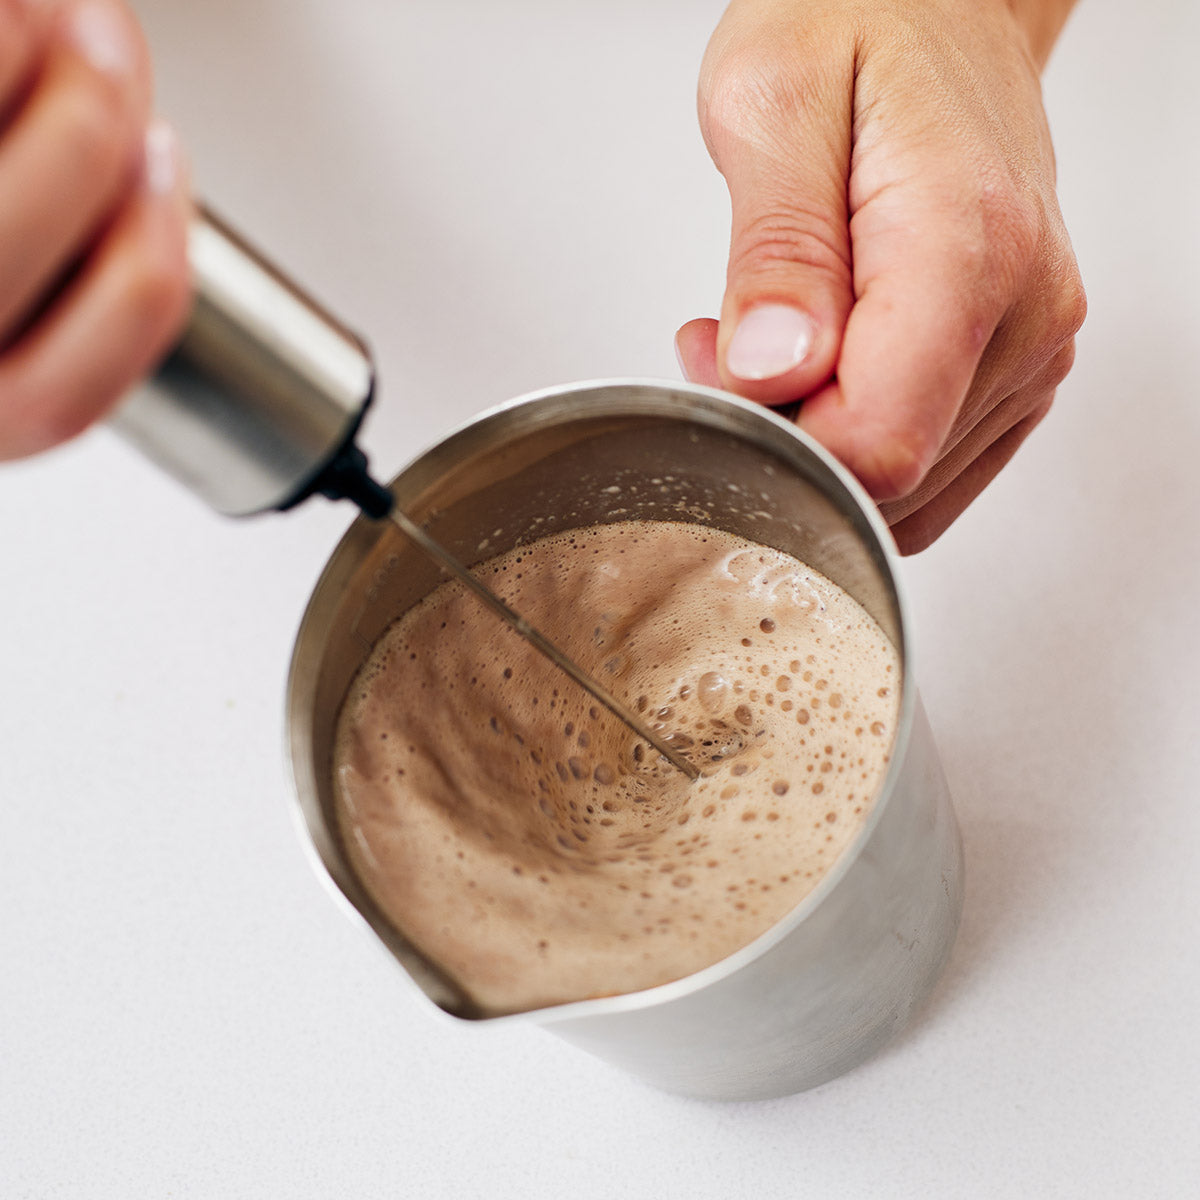 Woman mixing a Calm cacao latte with rechargeable frother in a silver mixing mug